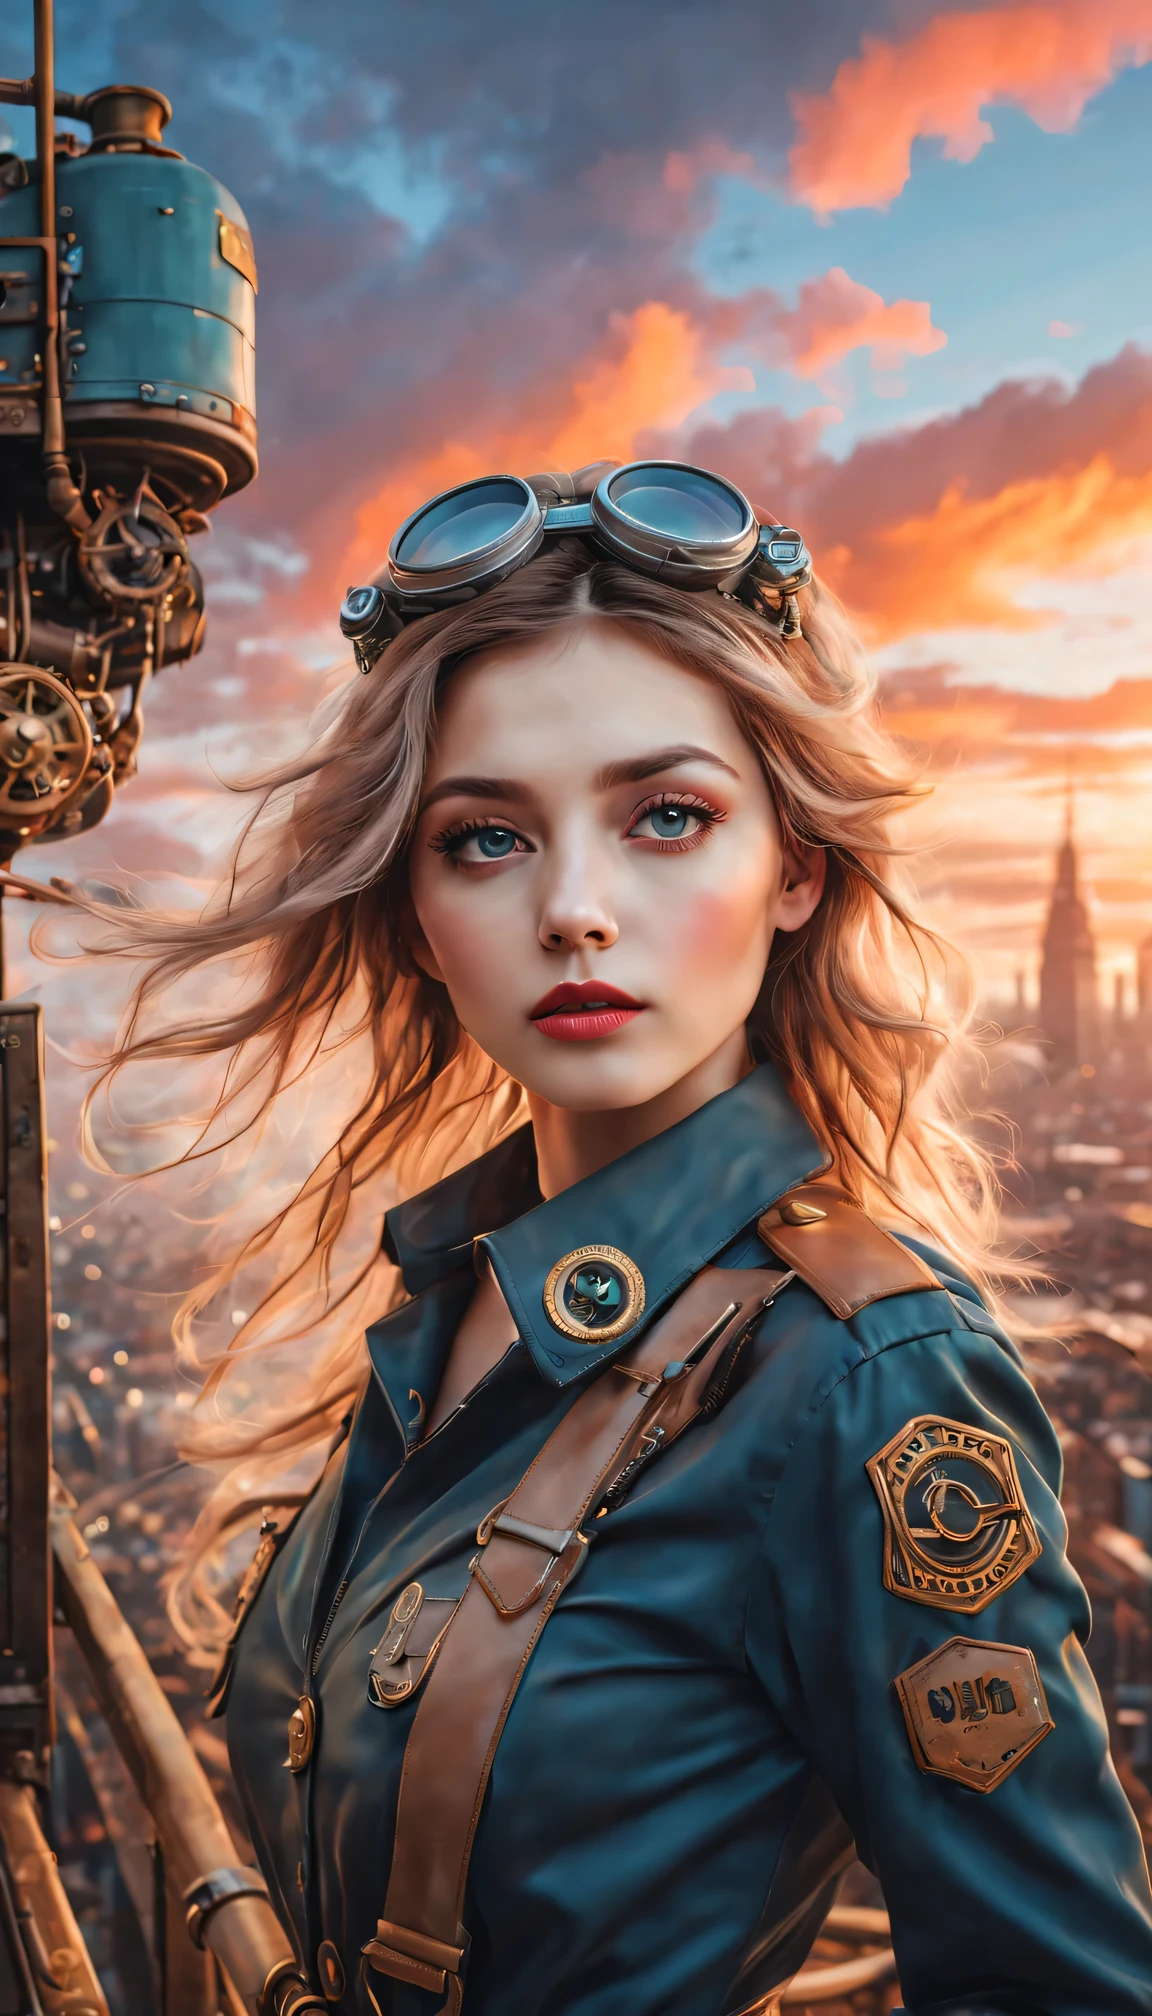 （best quality，4K，8k，masterpiece：1.2），Super fine，（lifelike，photorealism，照片lifelike度：1.37），Future retro female pilot、Her eyes are very delicate，Long eyelashes make her even more attractive。soft, Natural light illuminates her face，Highlight her expressive lips，A faint smile hanging on the corner of the mouth。Steampunk clothing、adventure、Clouds cover the sky、futuristic cityscape、metal surfaces、graffiti-covered walls、urban aging、Hair blown by the wind、confident posture、Emerge from the cloud，Hand drawn illustrations，Contrasting colors，(pastel tones)，ethereal beauty，otherworldly scenery，Lens illumination，Impressive machinery，Sunset，creative imagination，work，Full of emotion，Inspiring ambition。